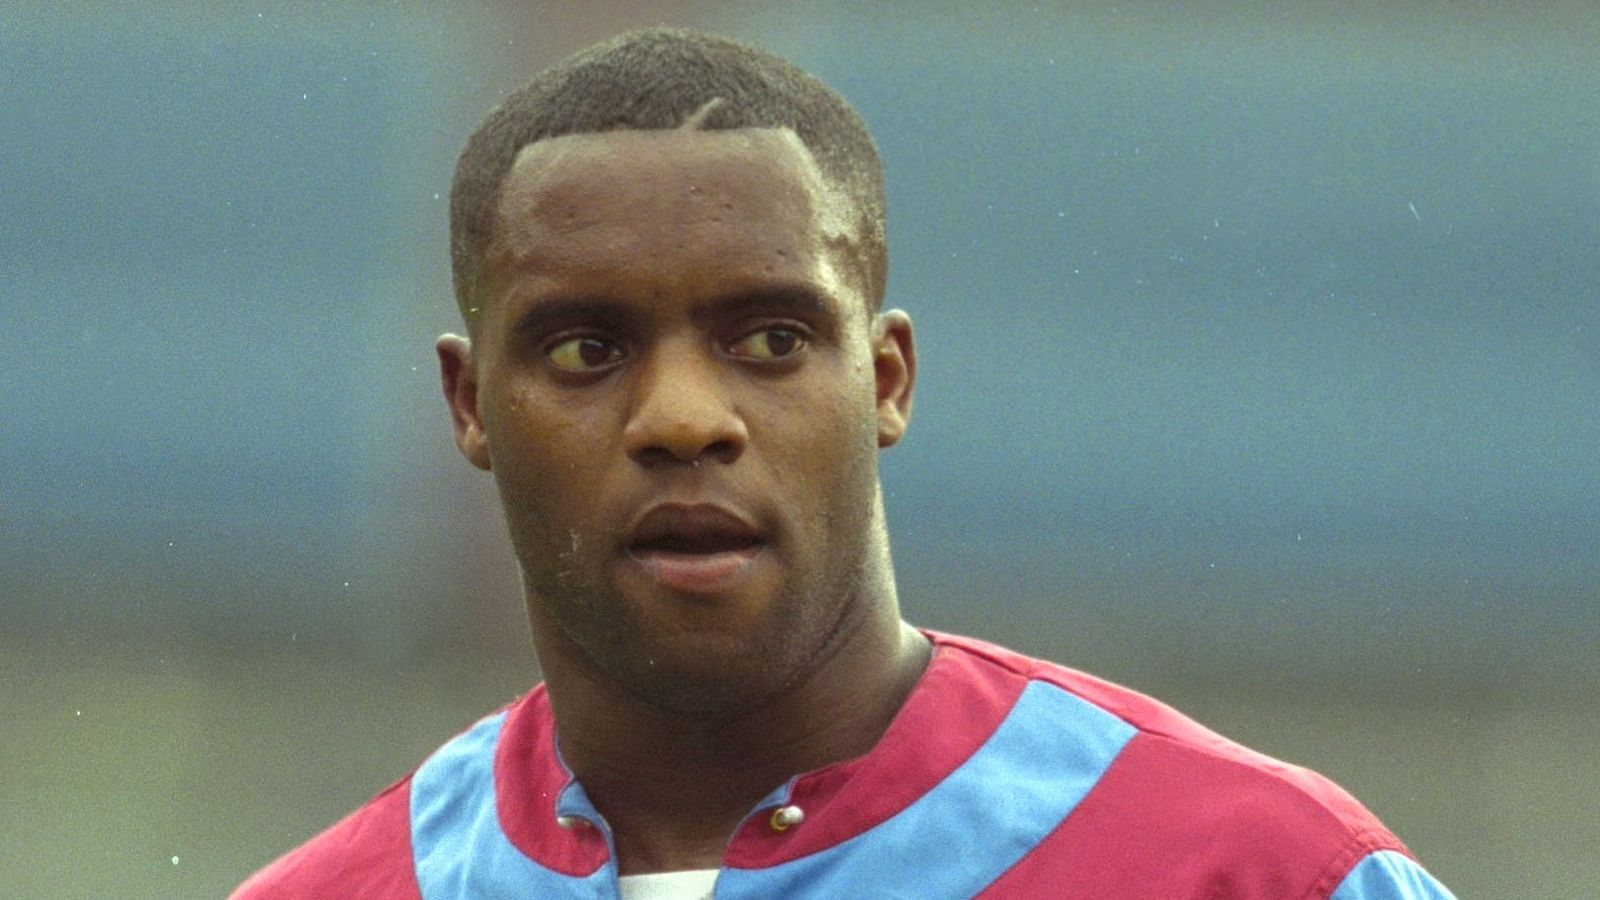 Dalian Atkinson: Police officer found guilty of gross misconduct for using excessive force against ex-Aston Villa player